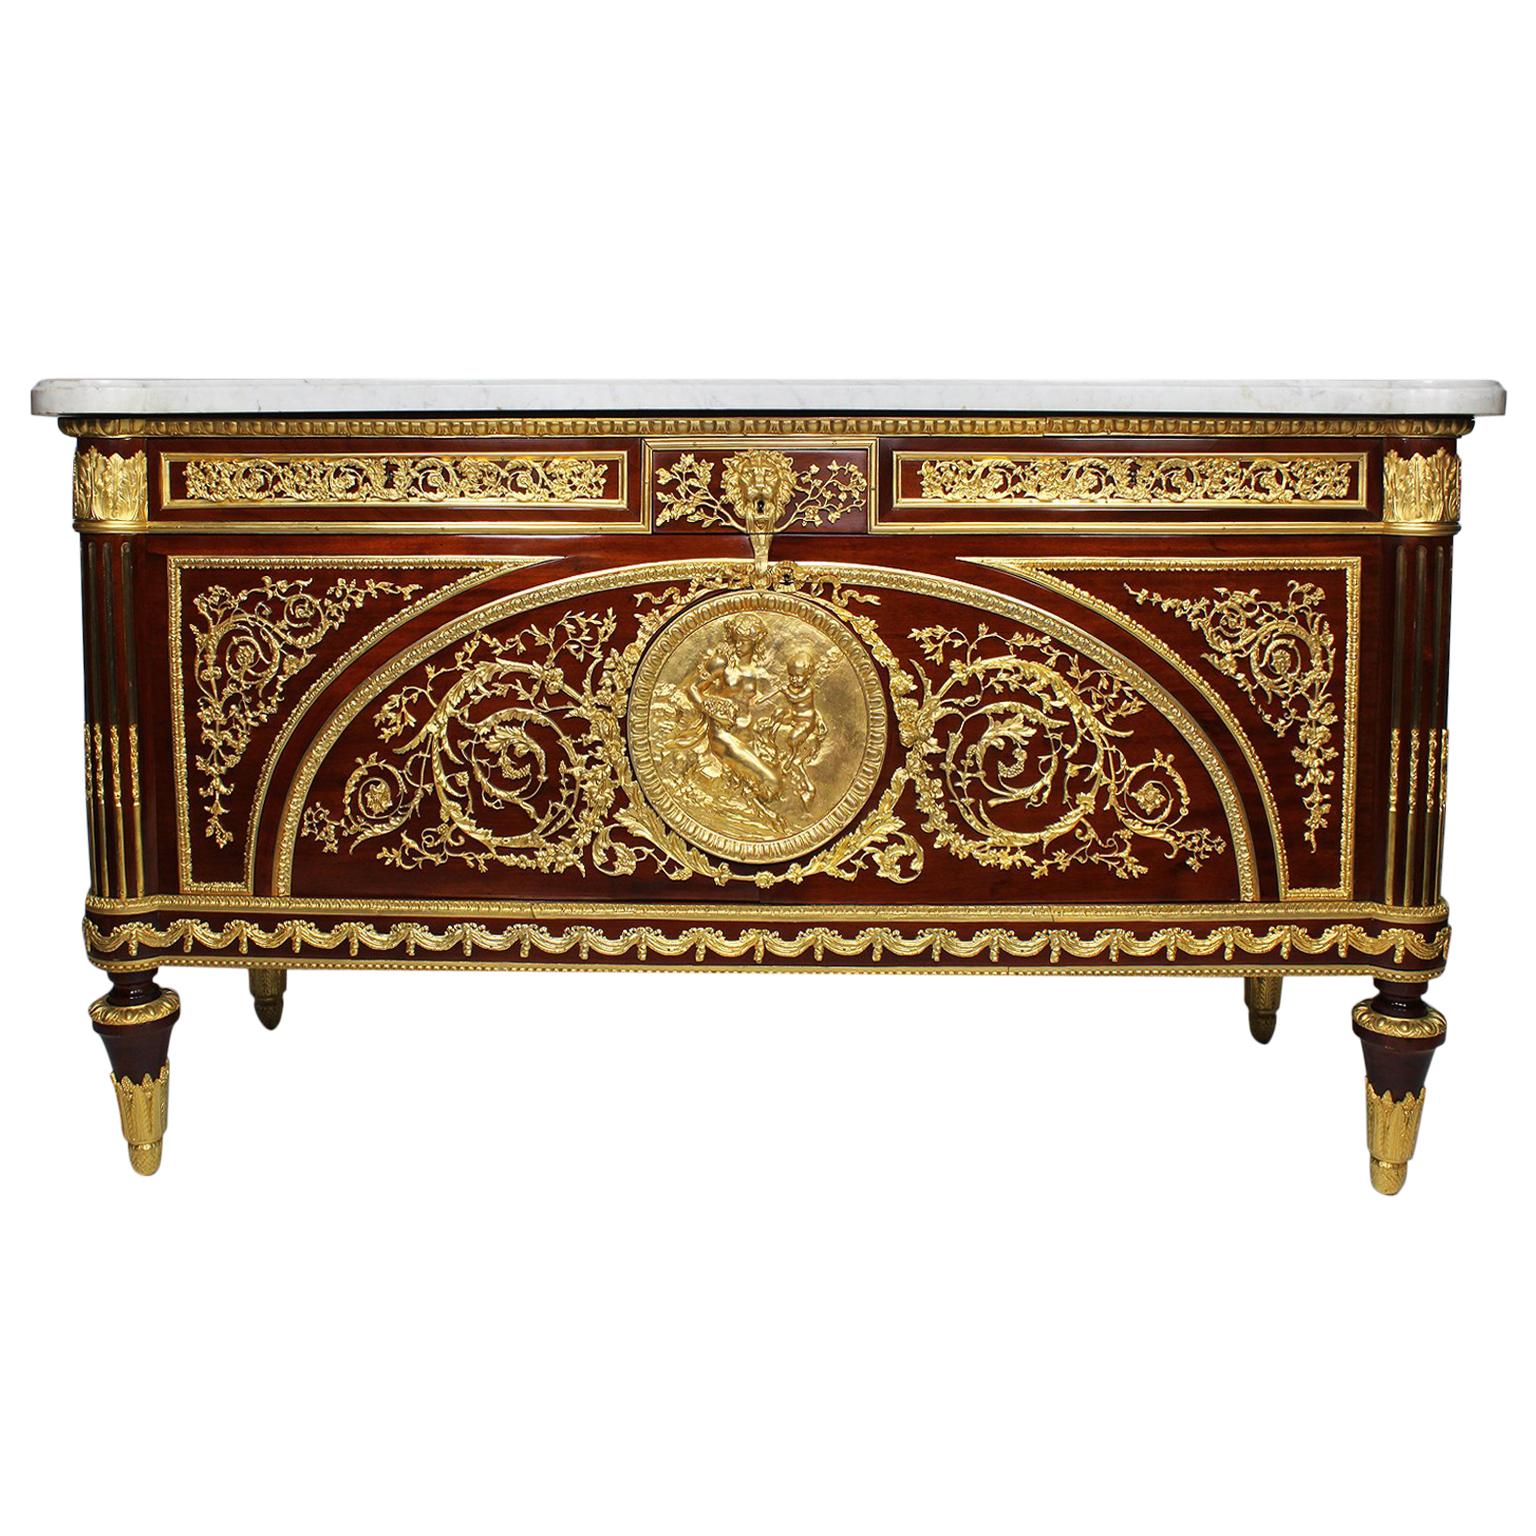 Impressive French Louis XVI Style Mahogany Gilt Bronze Mounted Server Commode For Sale